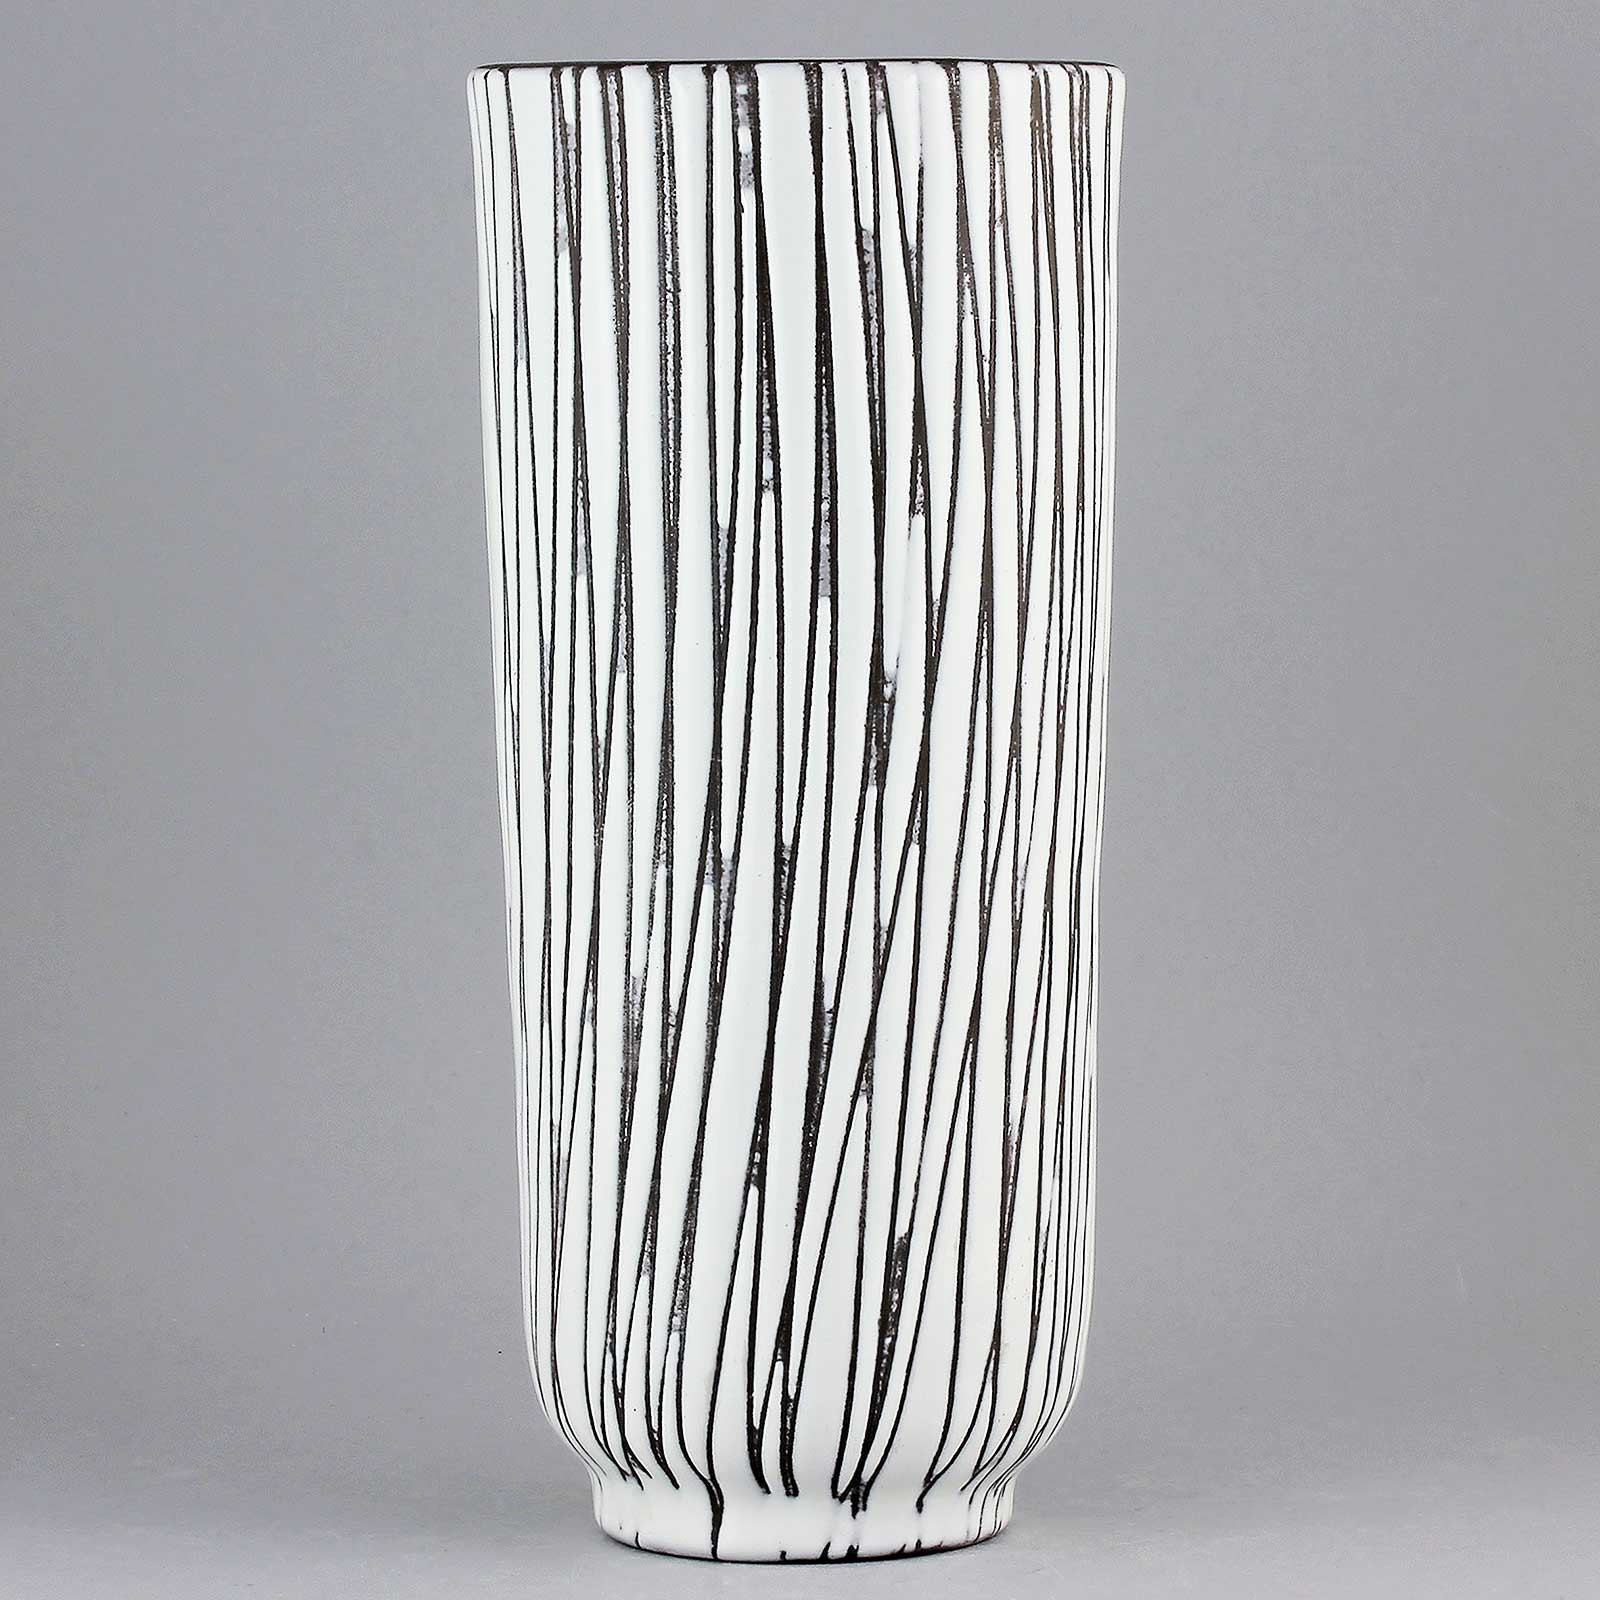 27 Great 20 Inch Glass Vase 2024 free download 20 inch glass vase of mari simmulson mars 1952 striking cylinder vase with 160825699 origpic e7f23b